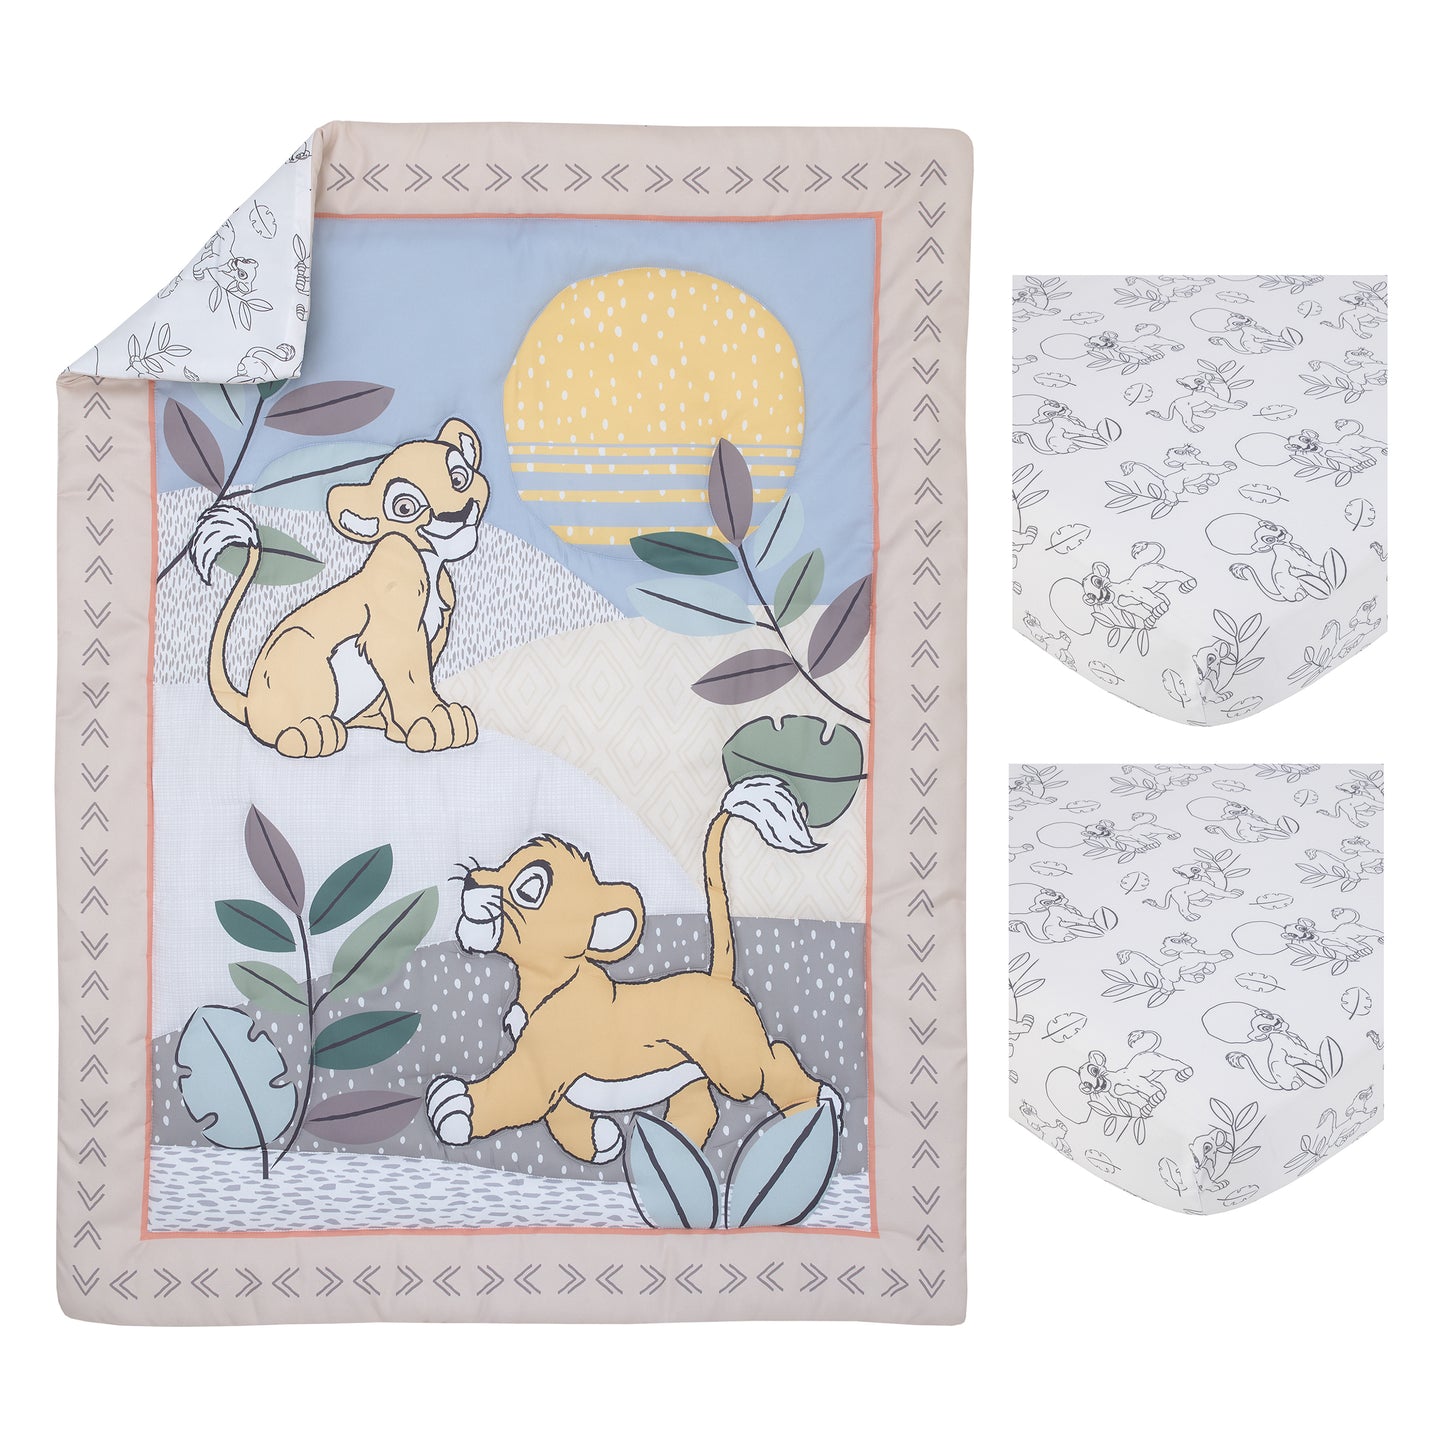 Disney Lion King Leader of the Pack Taupe and Green Simba and Nala Sunset and Leaves 3 Piece Nursery Mini Crib Bedding Set - Comforter and Two Fitted Mini Crib Sheets